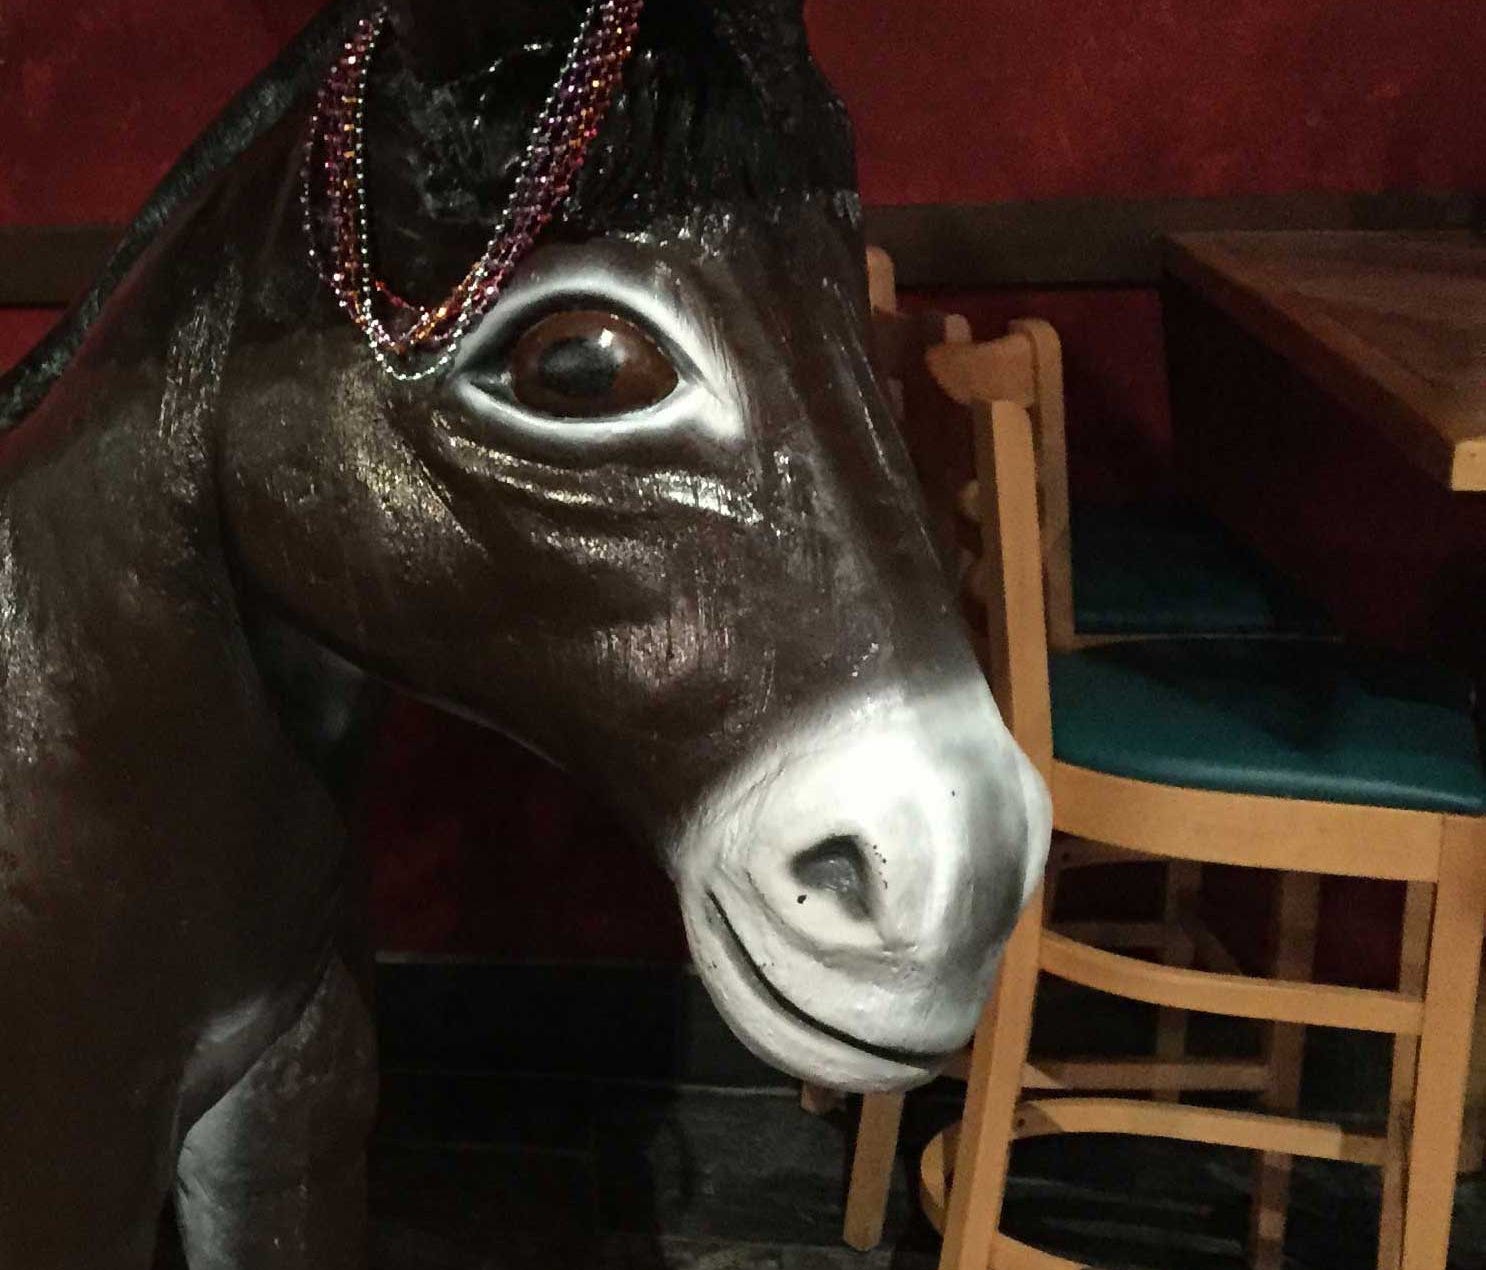 Donkey statue at El Jalisco in Southwood.